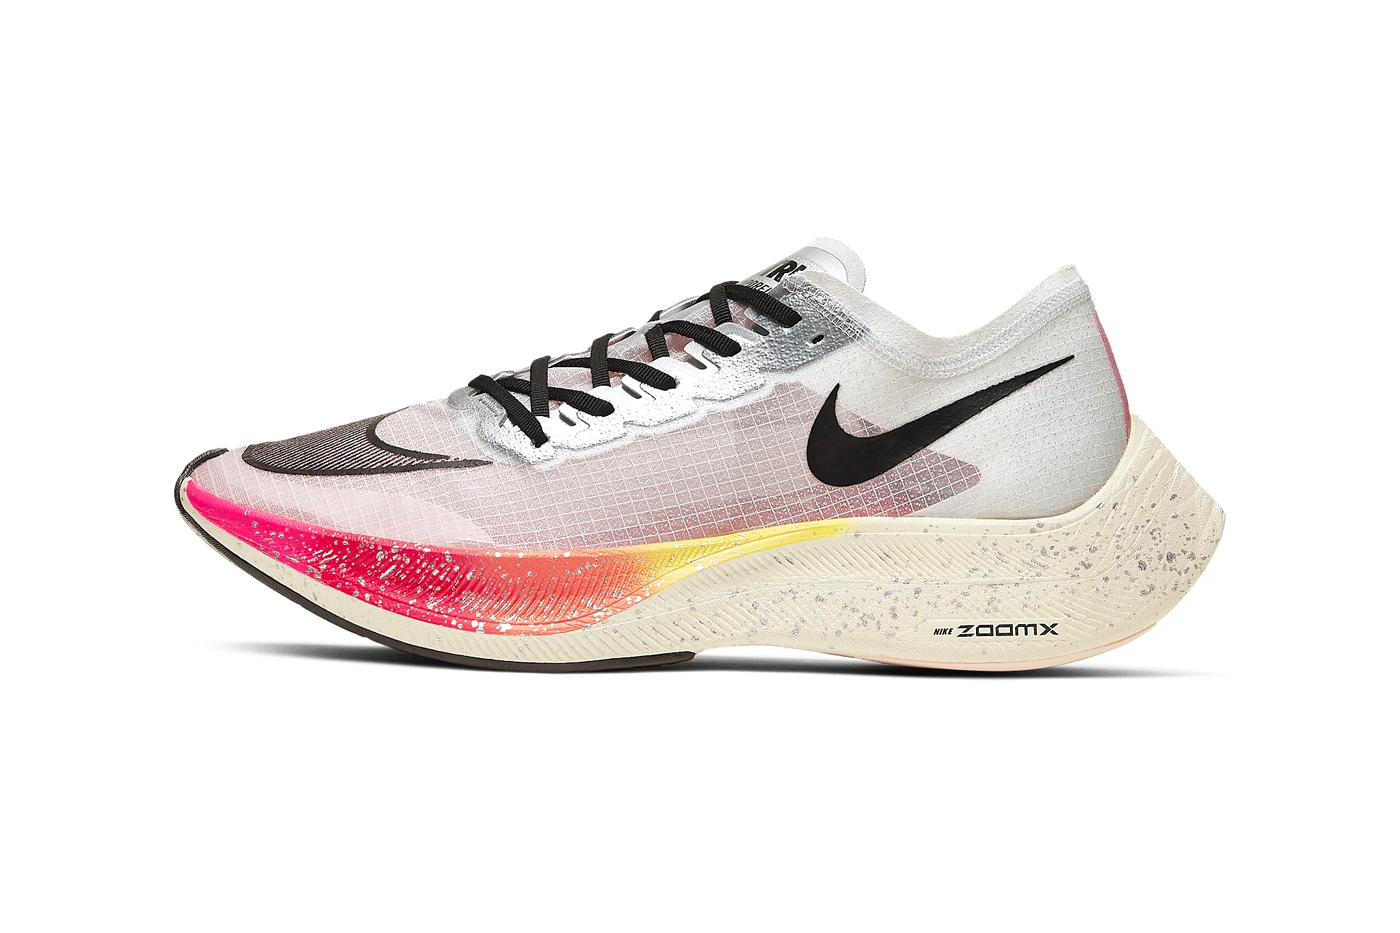 Nike Zoomx Vaporfly Next% Be True Coloway Release | HYPEBEAST